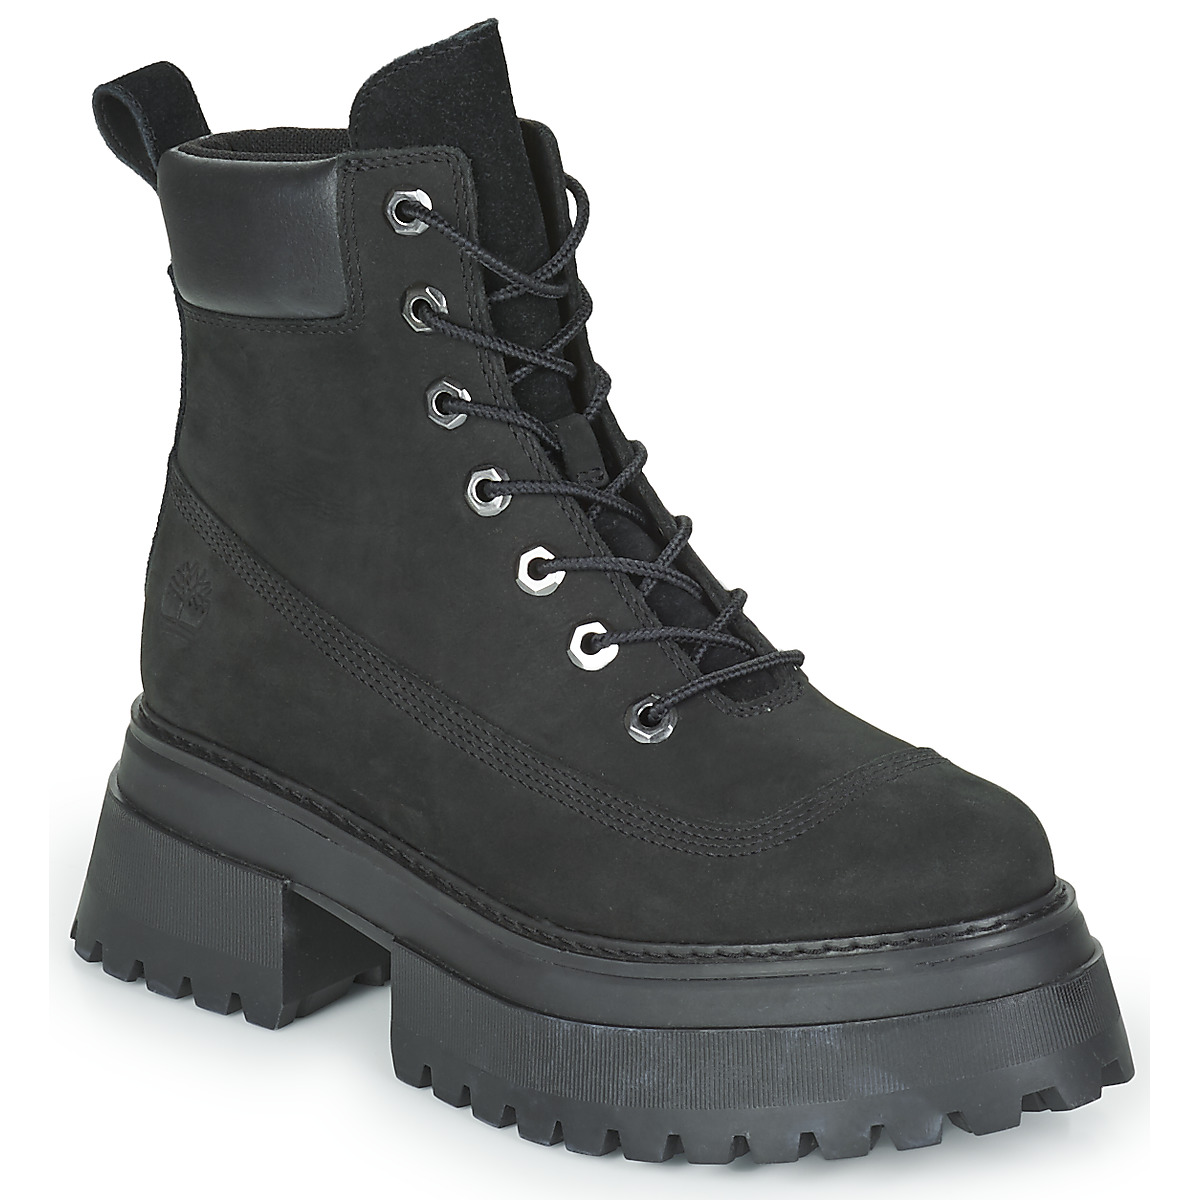 Sapatos Mulher timberland mtcr marron Timberland Sky 6In LaceUp Preto